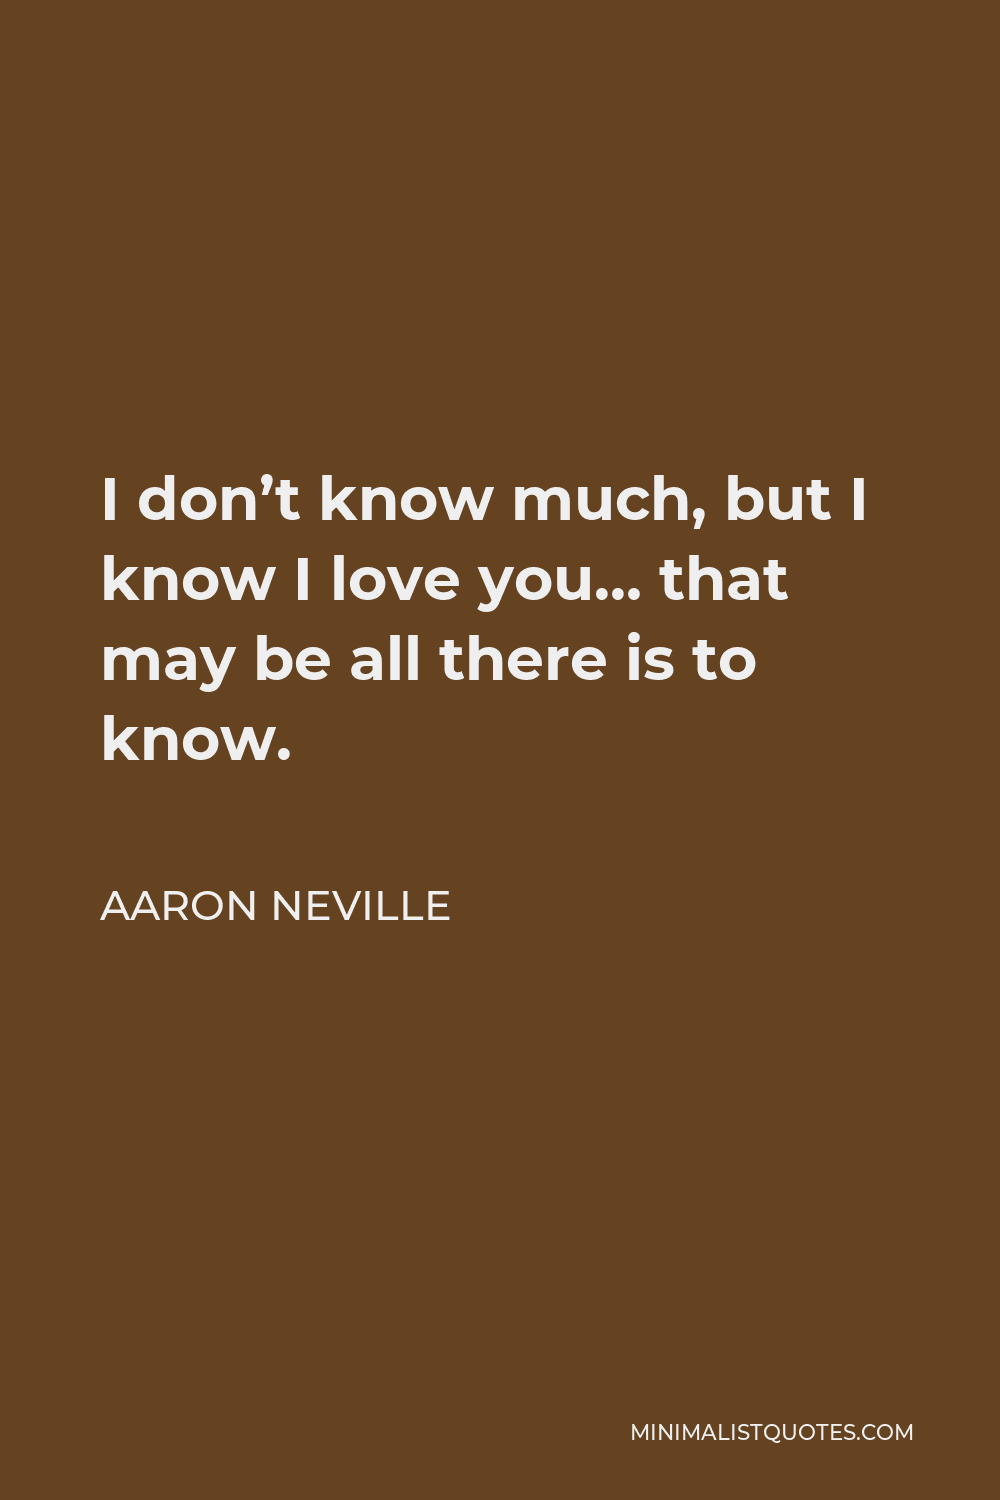 Aaron Neville Quote - I don’t know much, but I know I love you… that may be all there is to know.